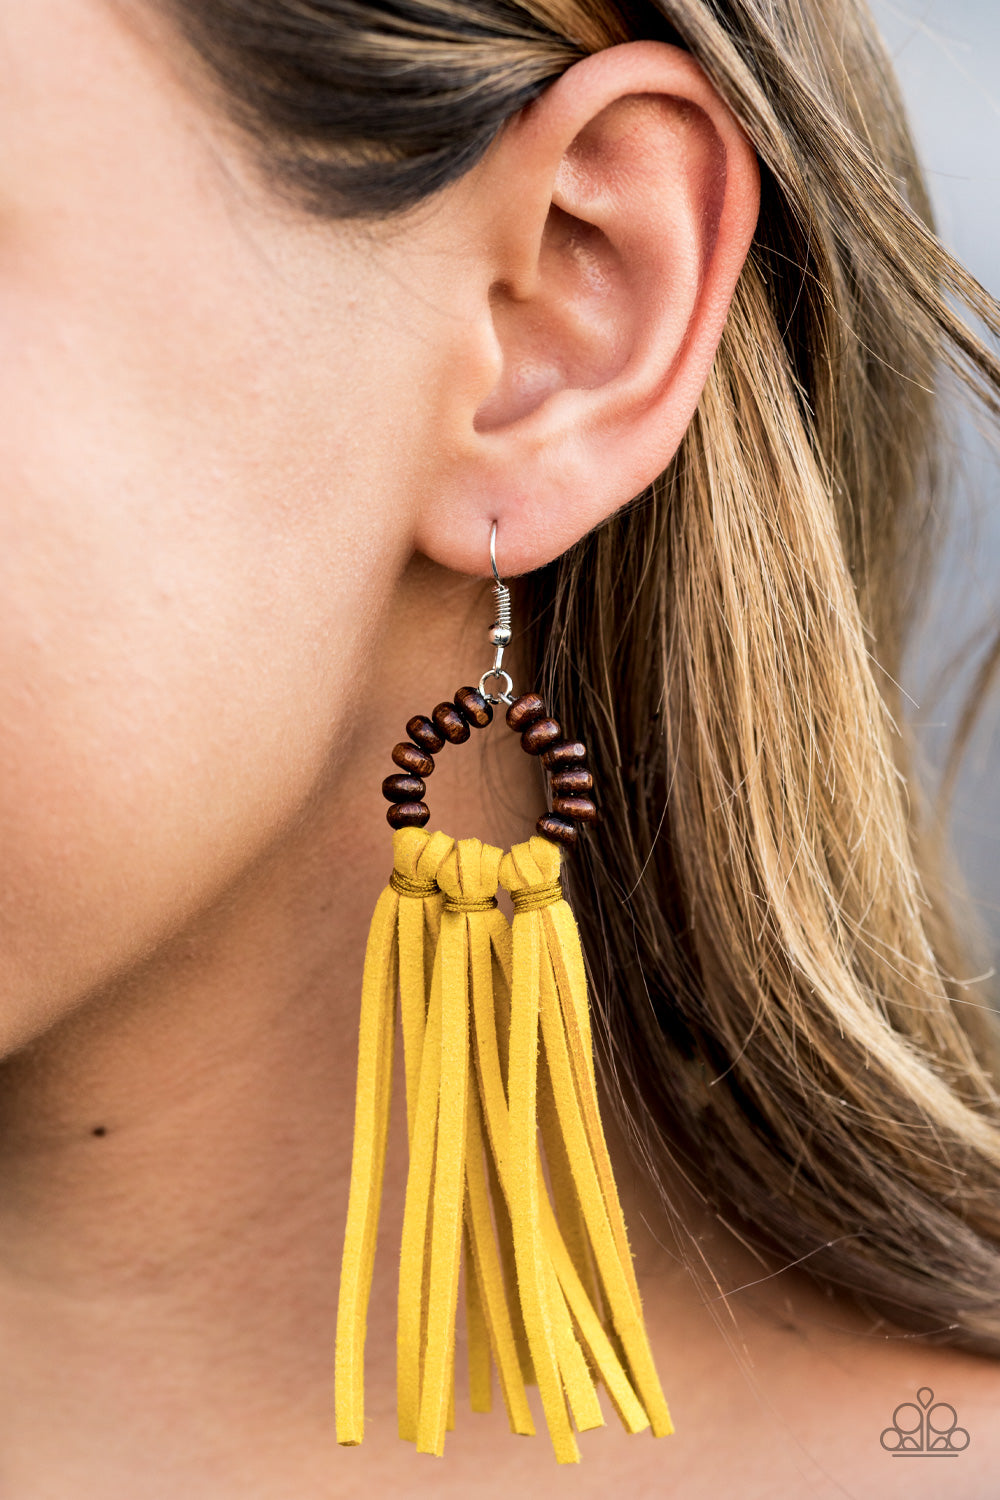 Amazon.com: Tassel Earrings for Women - Faux Suede Leather (Light Grey) :  Handmade Products